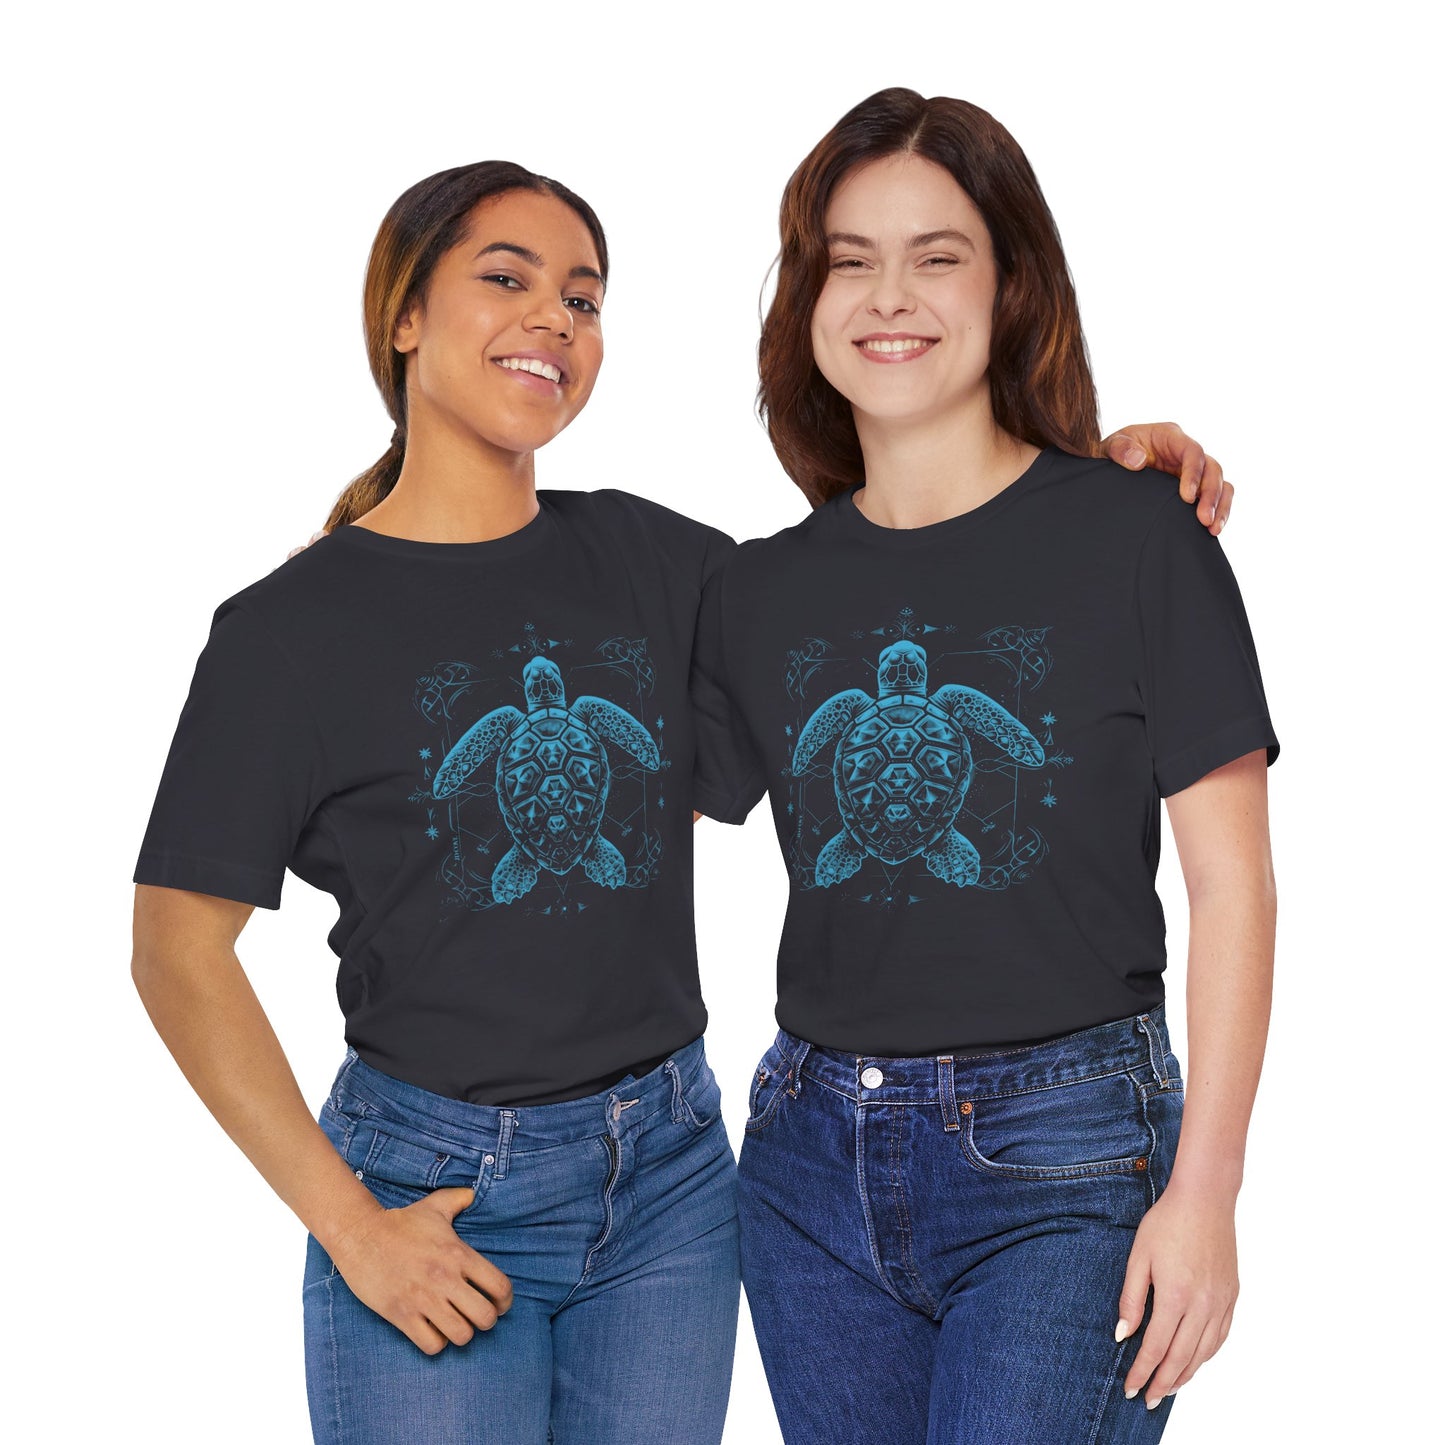 Wise Sea Turtle Graphic Tee - Unisex Eco-Friendly Cotton Shirt by JD Cove